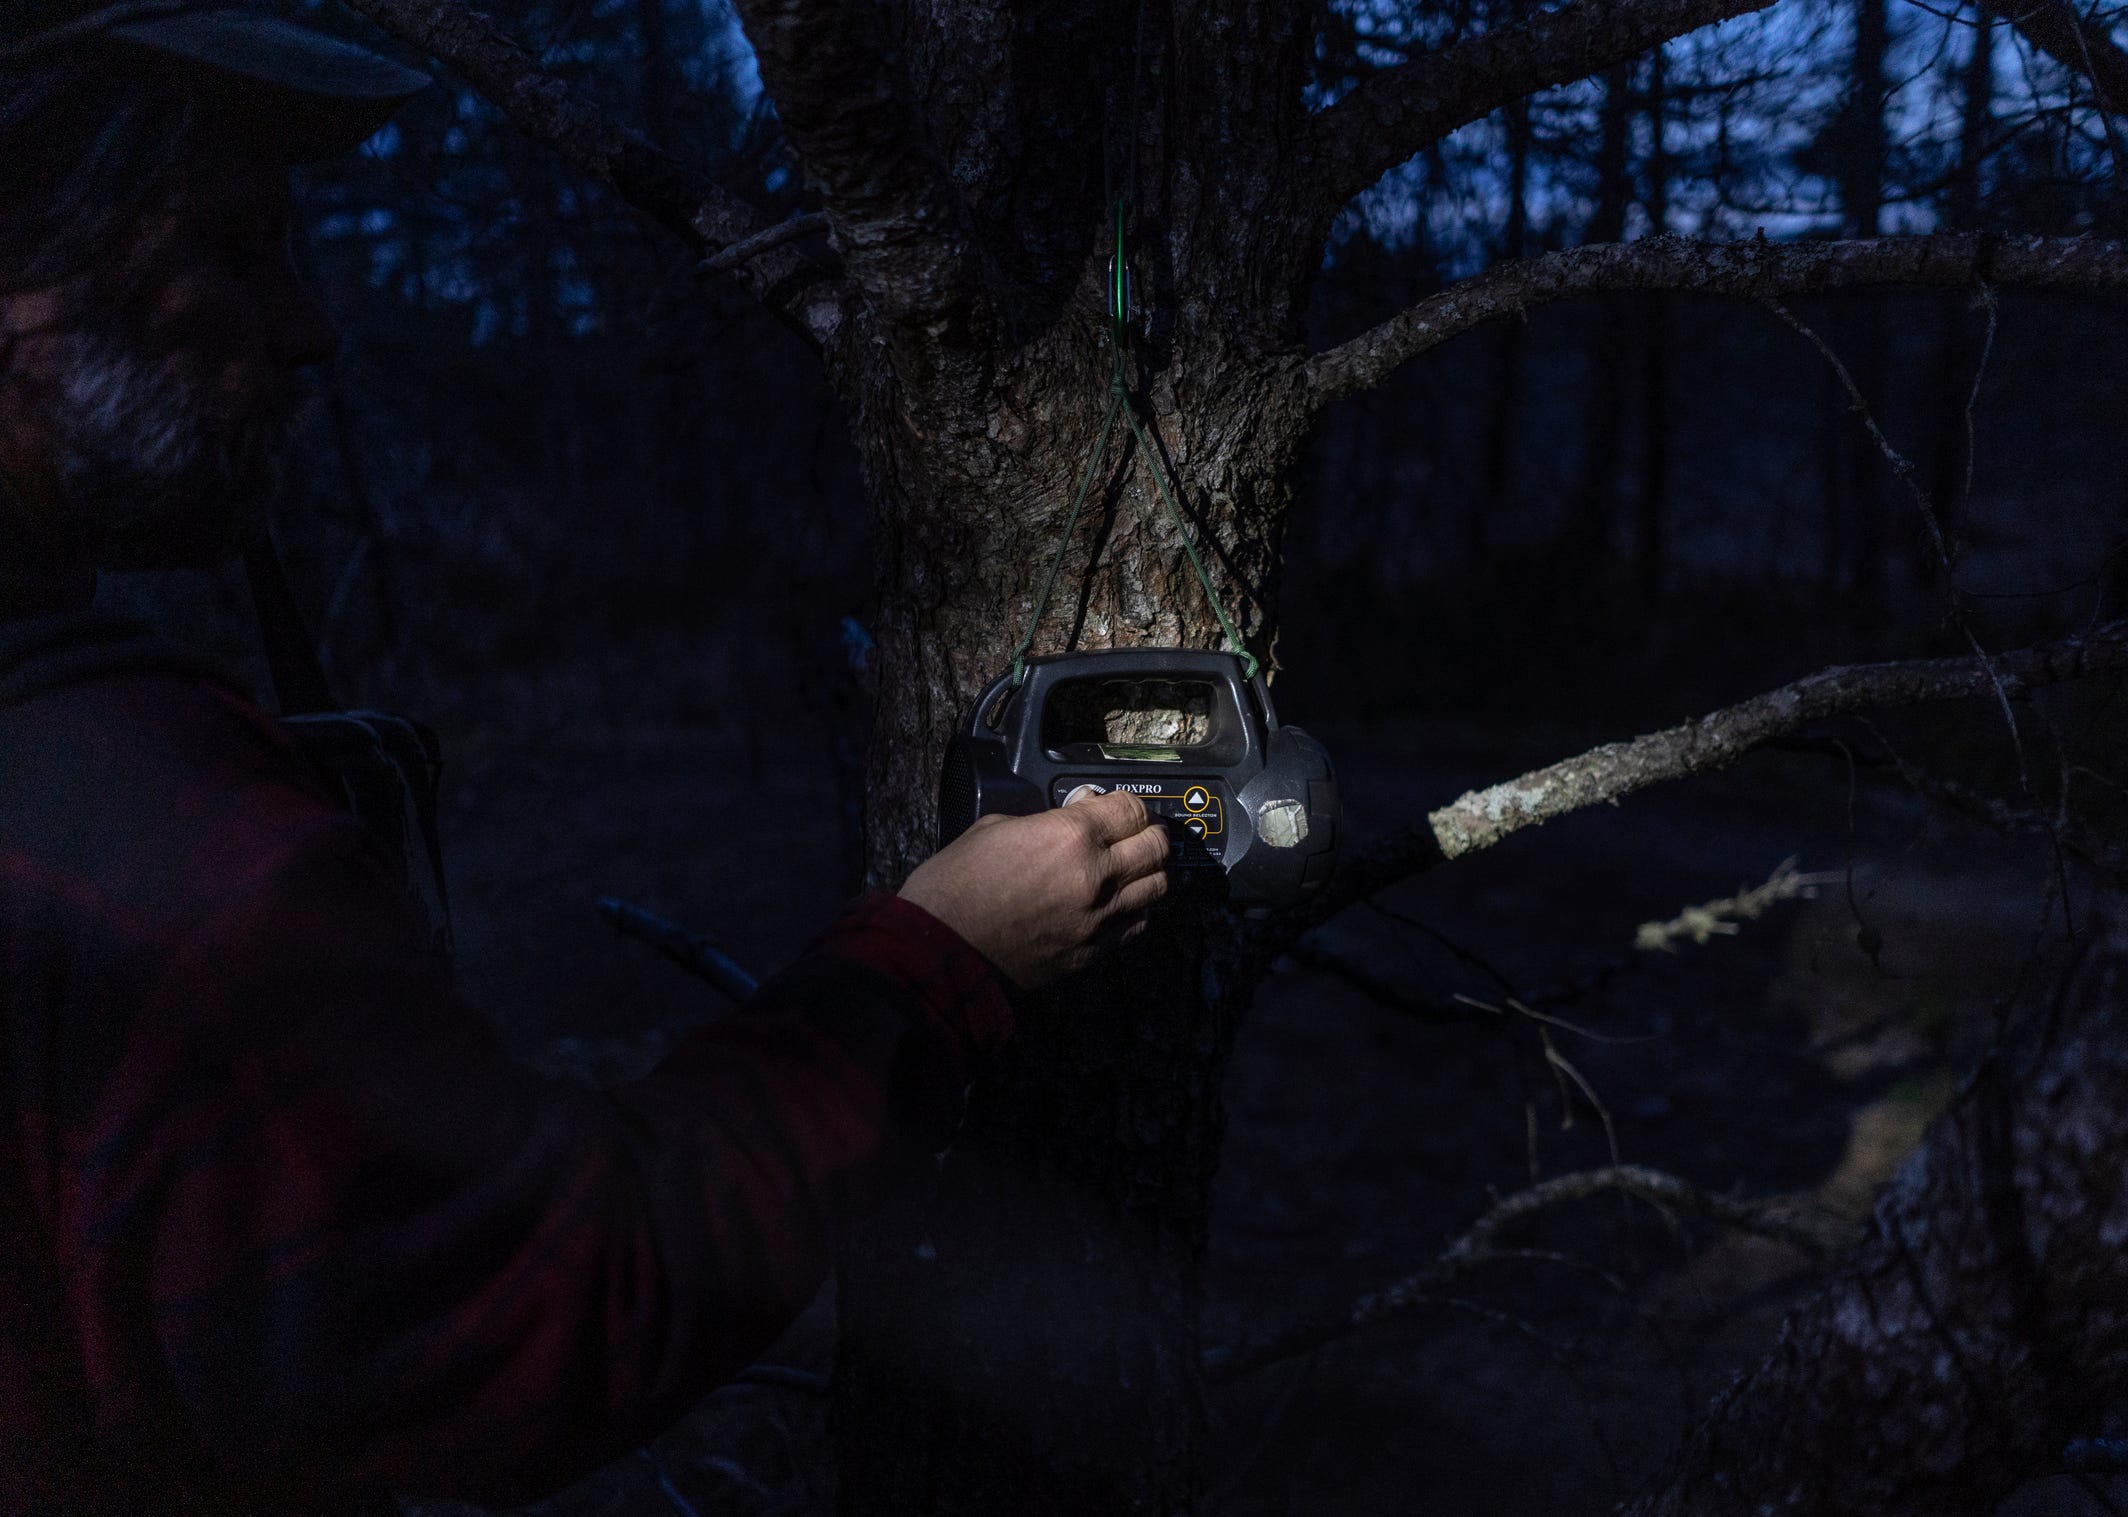 Owl bander Chris Neri turns the volume up on an audio lure playing the call of a Northern Saw-Whet owl while attaching it to a tree near mist nets designed to capture owls to be recorded and banded during their spring migration as the daylights fades while starting his work for the night at the Whitefish Point Bird Observatory in Paradise located in Michigan's Upper Peninsula on Friday, April 21, 2023.